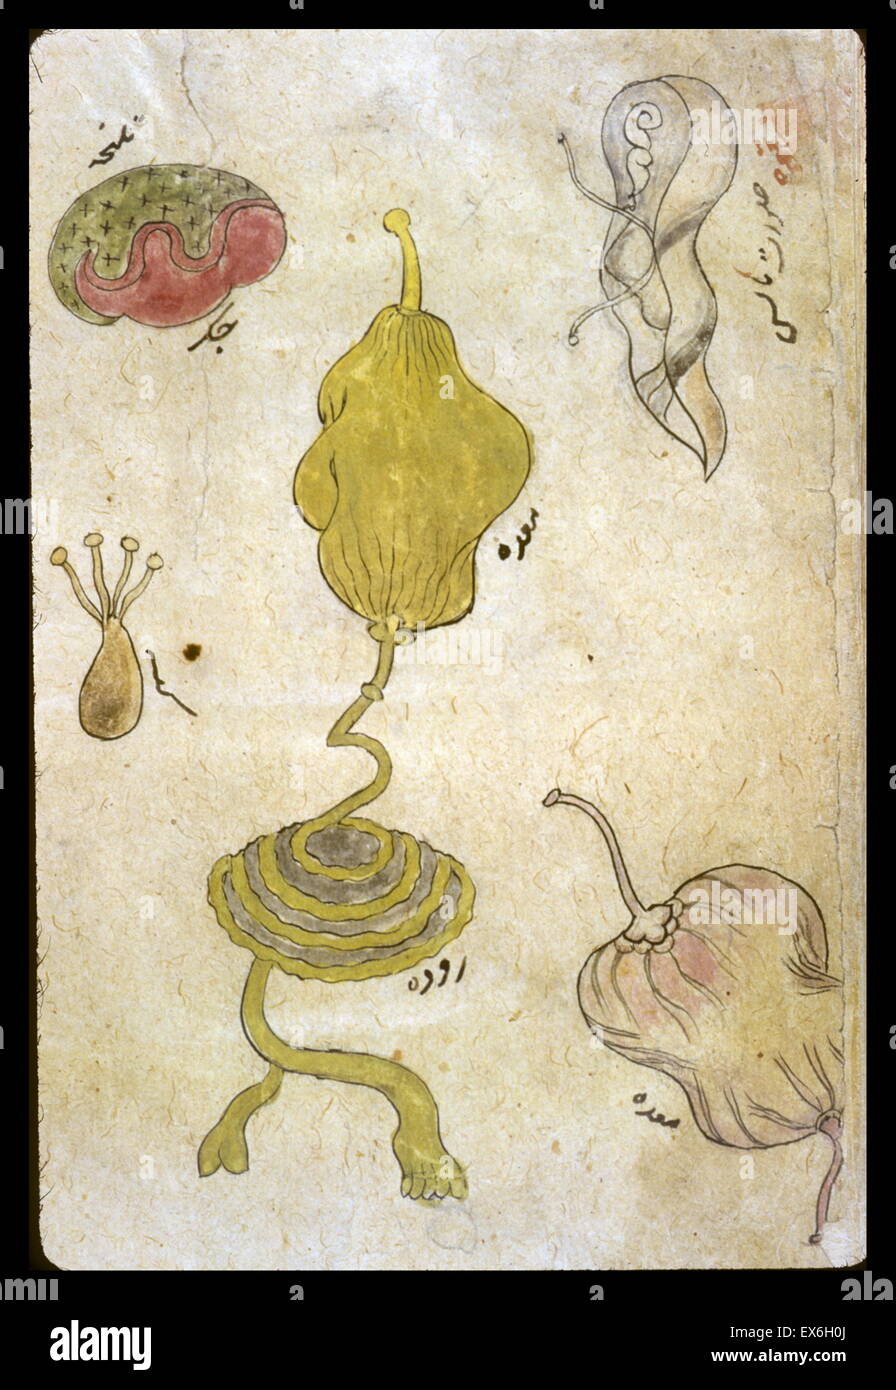 Drawings of individual organs in inks and opaque watercolours. Illustrated are [in upper left] the liver with gallbladder, [in the centre] the stomach with intestines, [lower left] the testicles, [lower right] a detail of the stomach, and something uniden Stock Photo